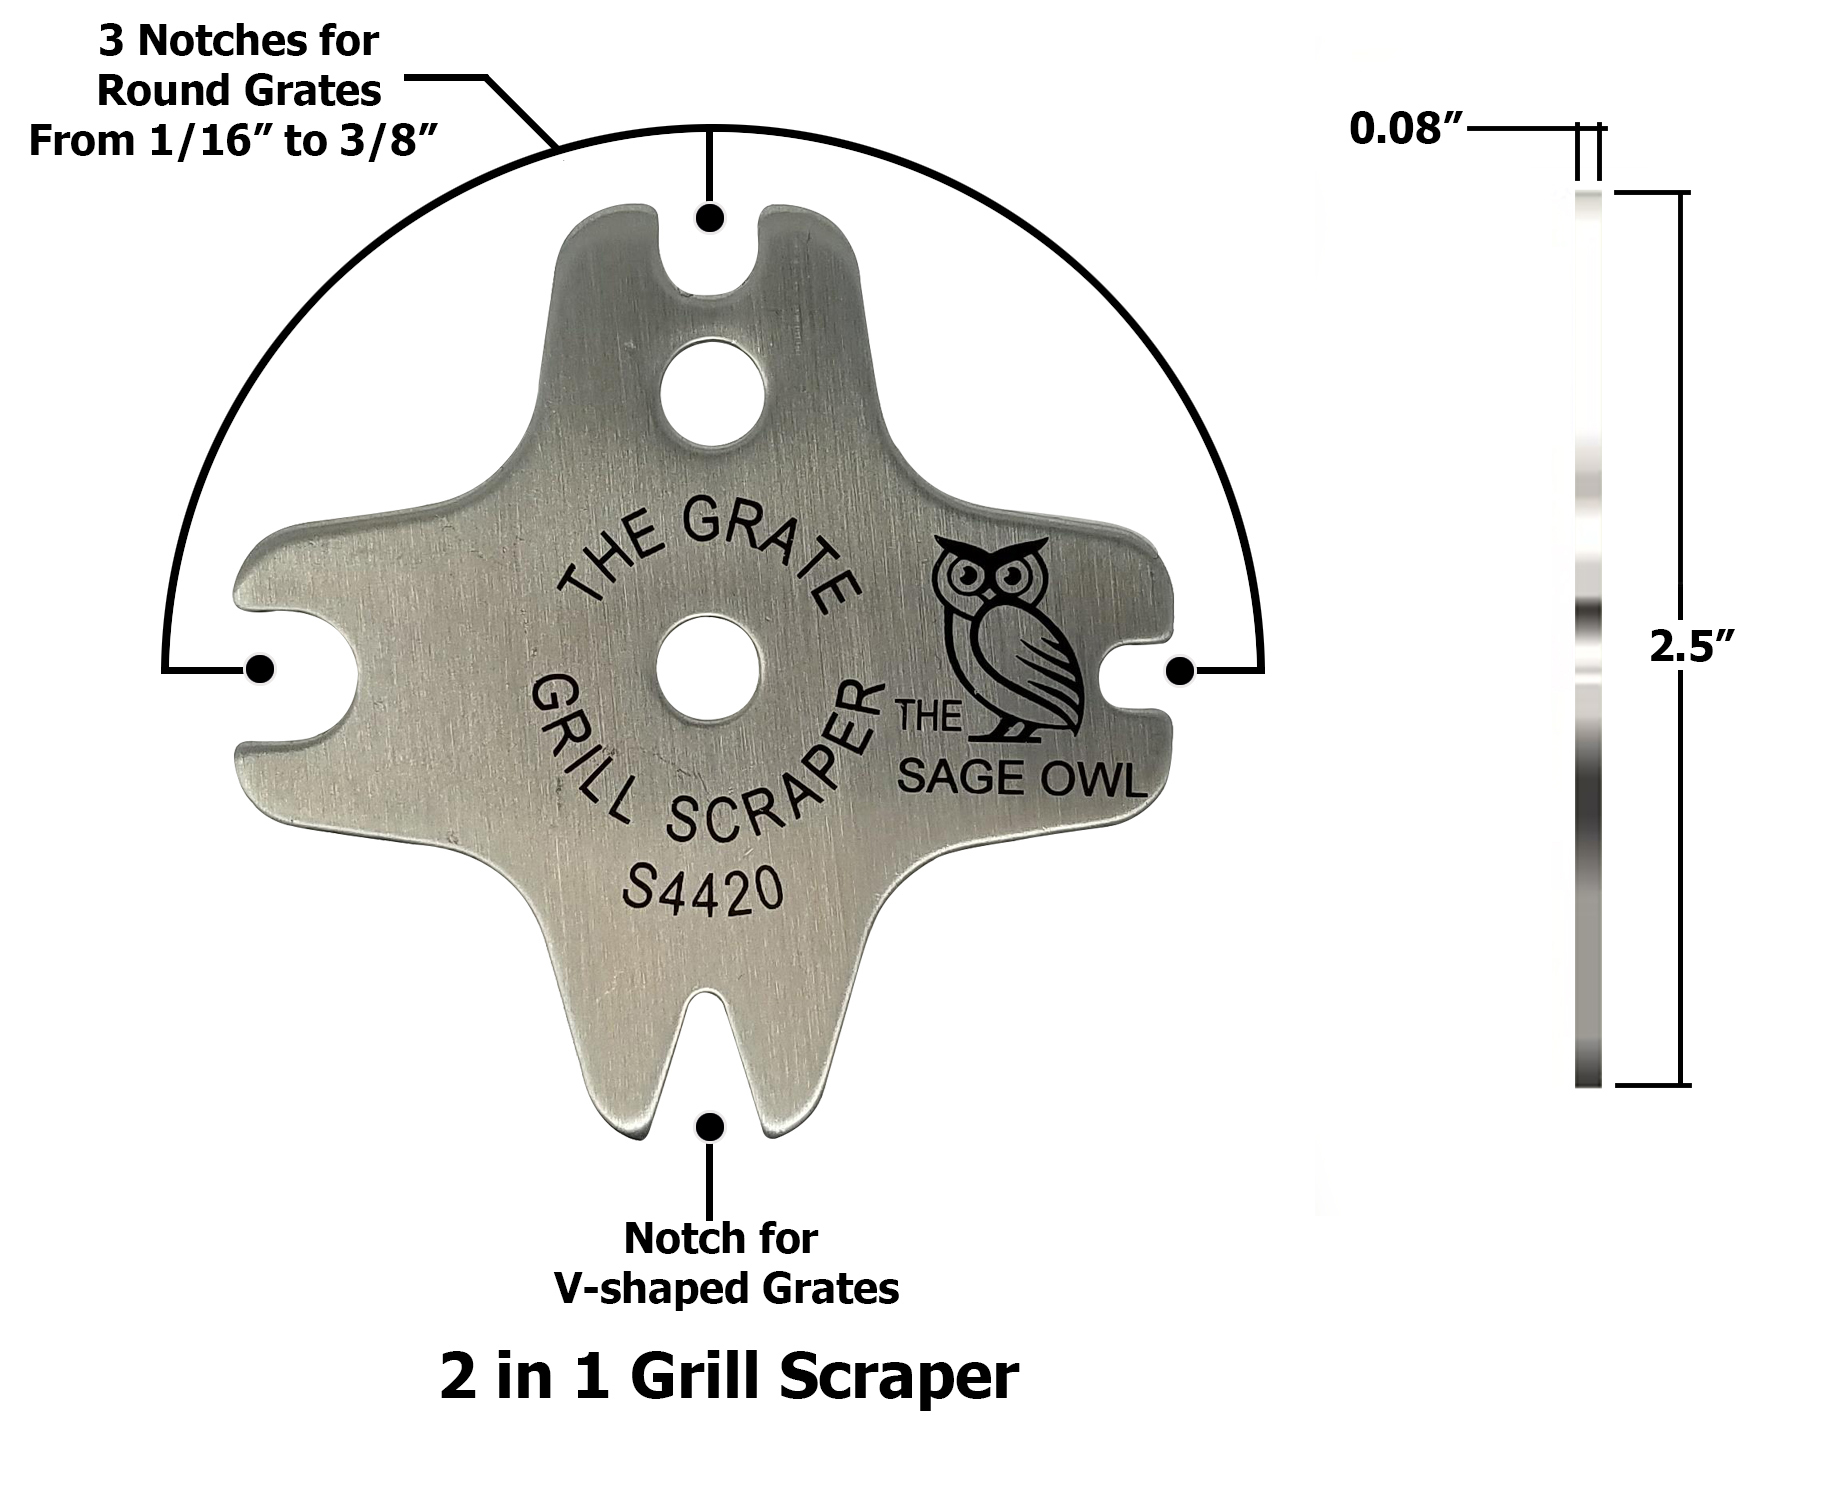 S4420 - The Grate Grill Scraper - Stainless Steel Barbecue Tool